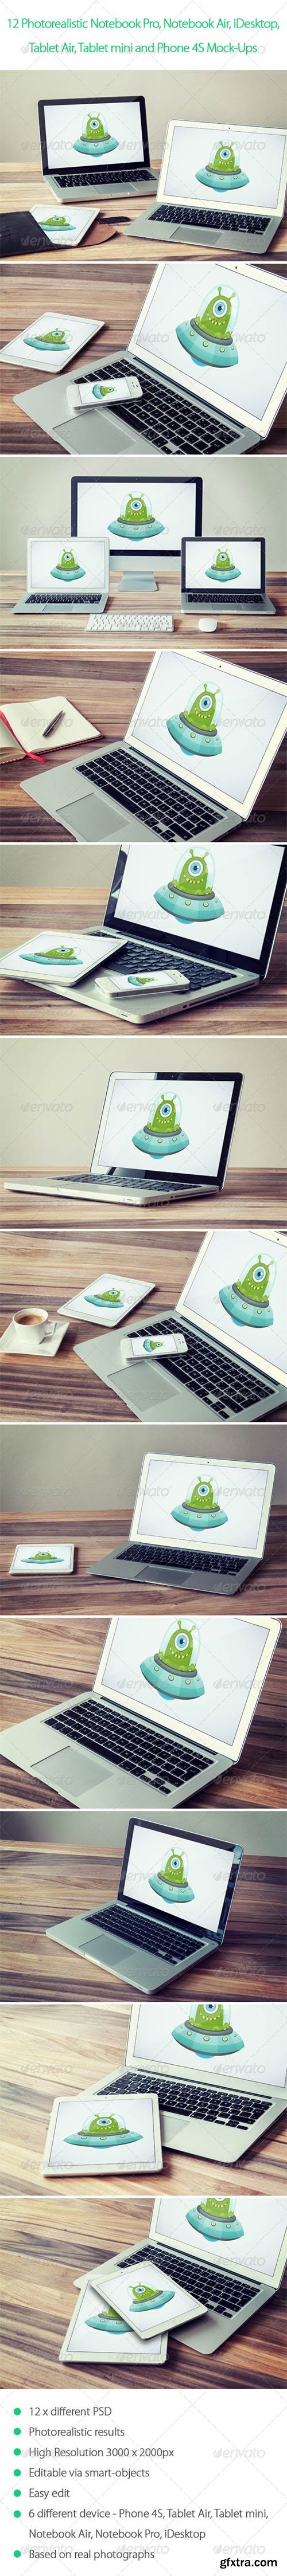 GraphicRiver - 12 Photorealistic Notebook, Mobile Device Mock-Ups